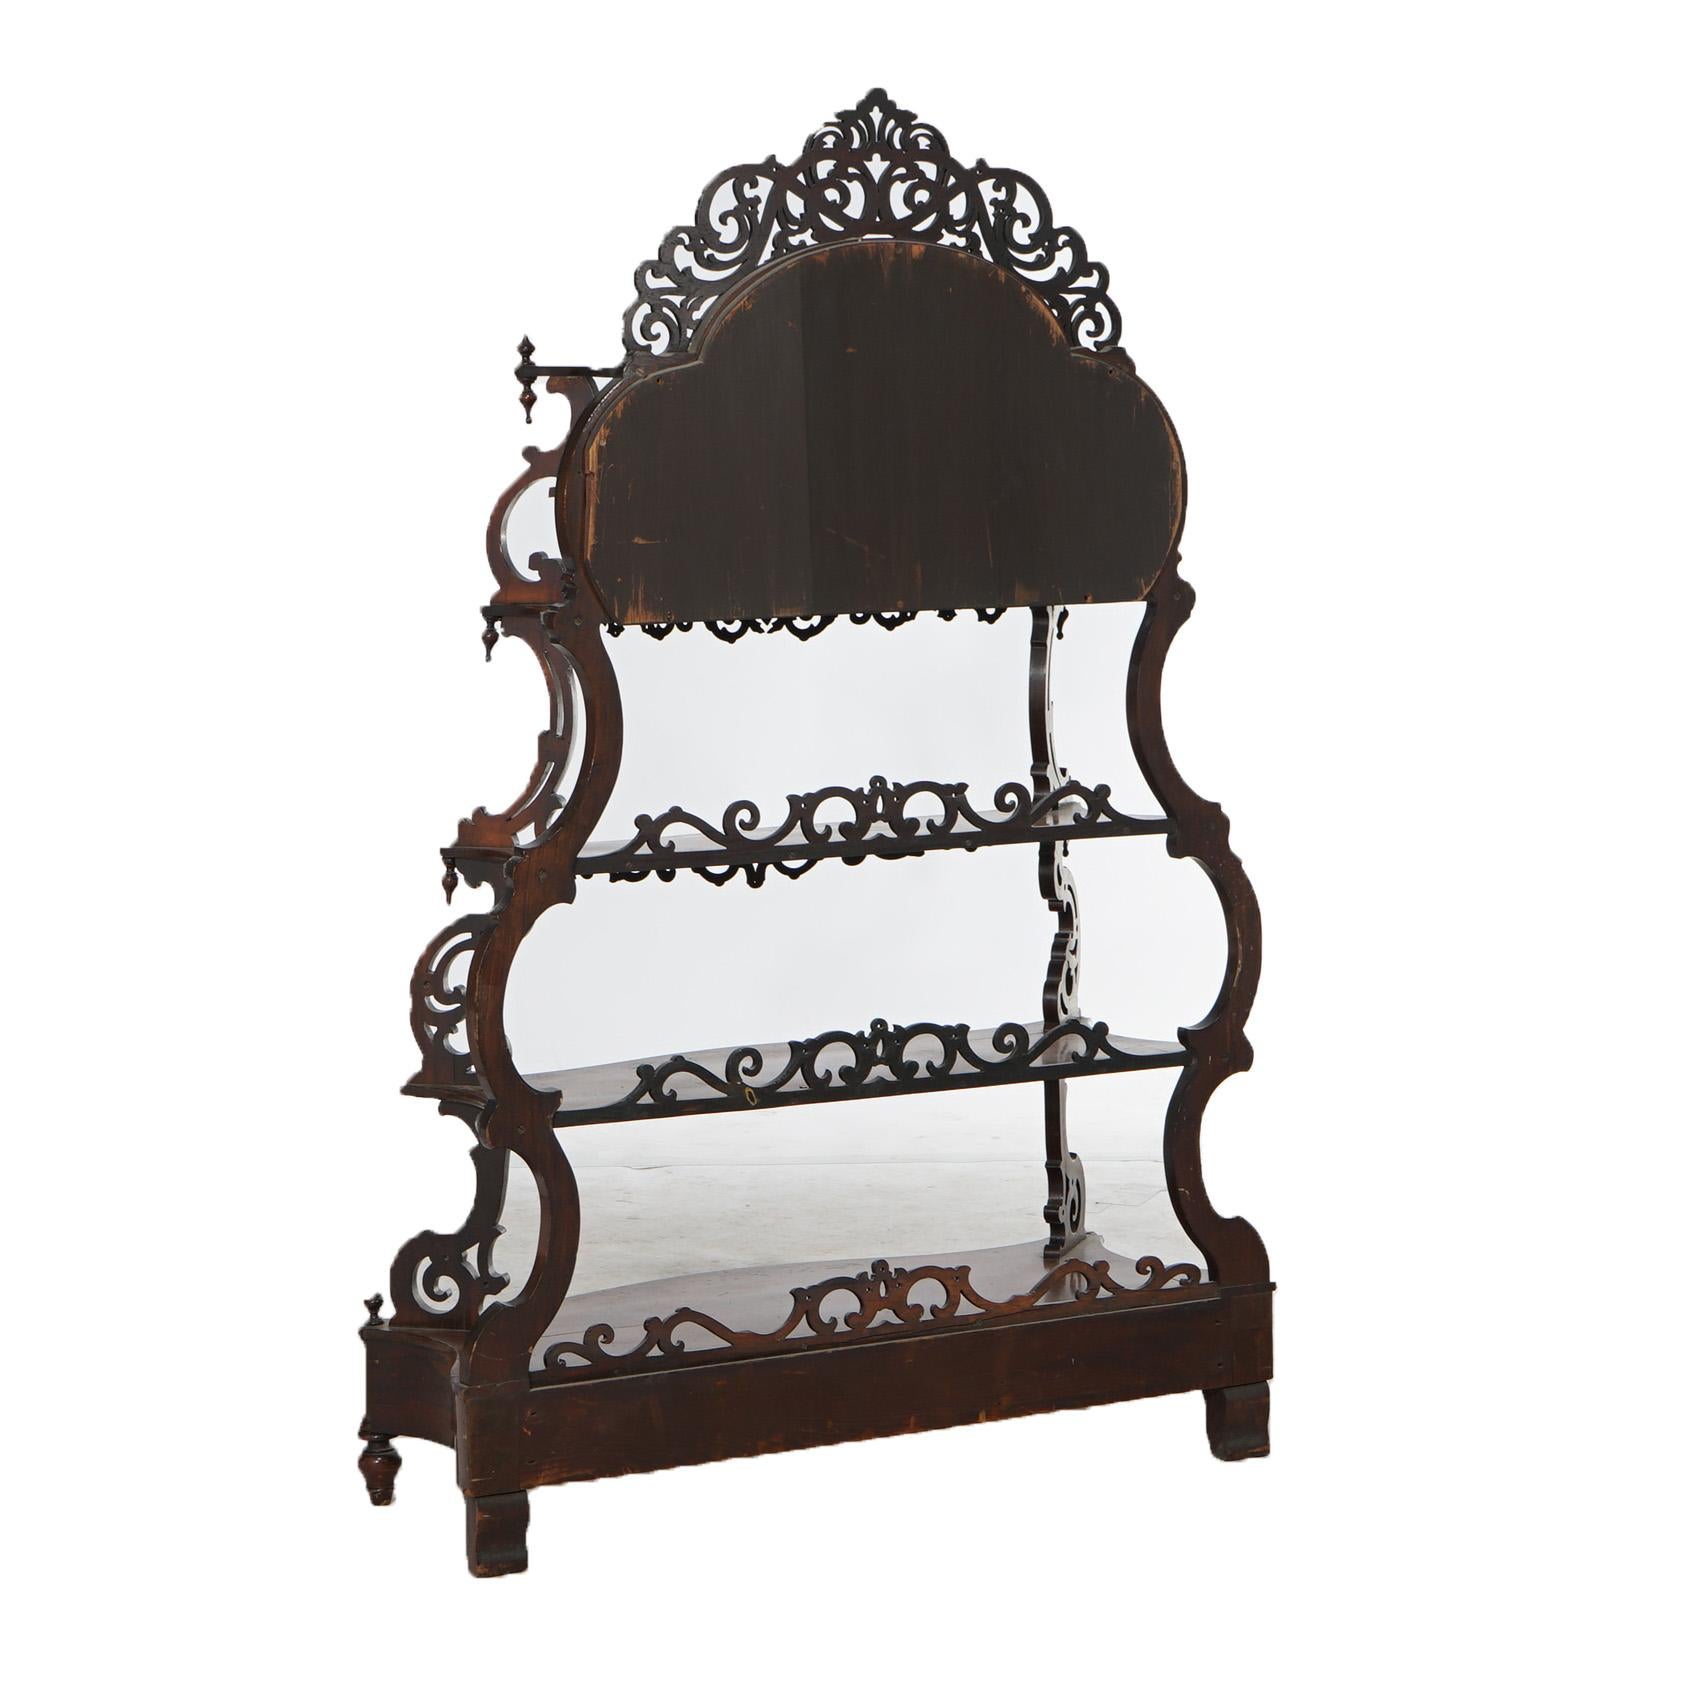 Antique Victorian Rococo Carved Walnut Rosewood Mirrored Etagere c1880 For Sale 4